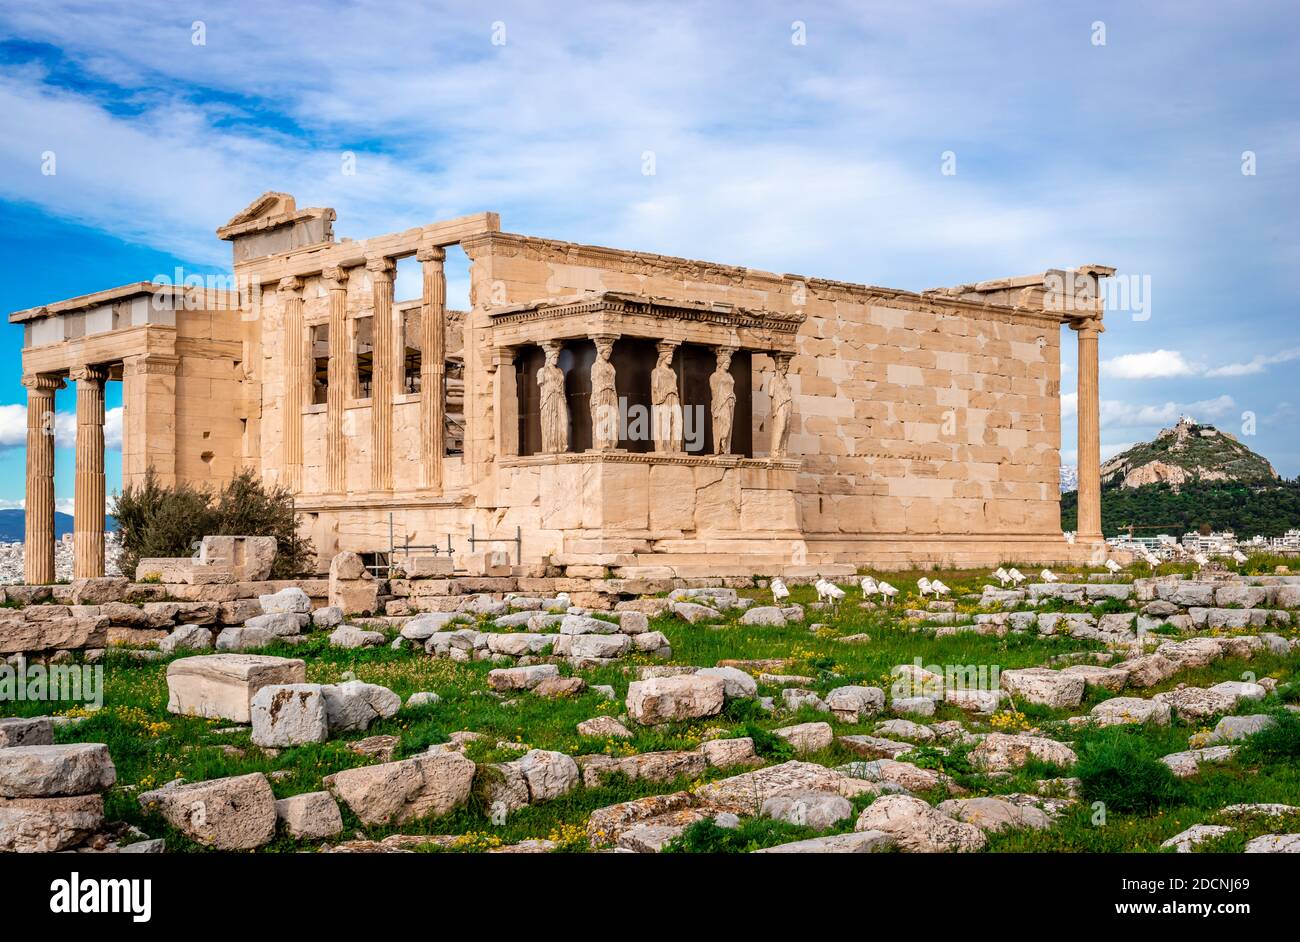 The Erechtheion or Erechtheum is an ancient Greek temple on Acropolis of Athens in Greece, which was dedicated to both Athena and Poseidon. Stock Photo